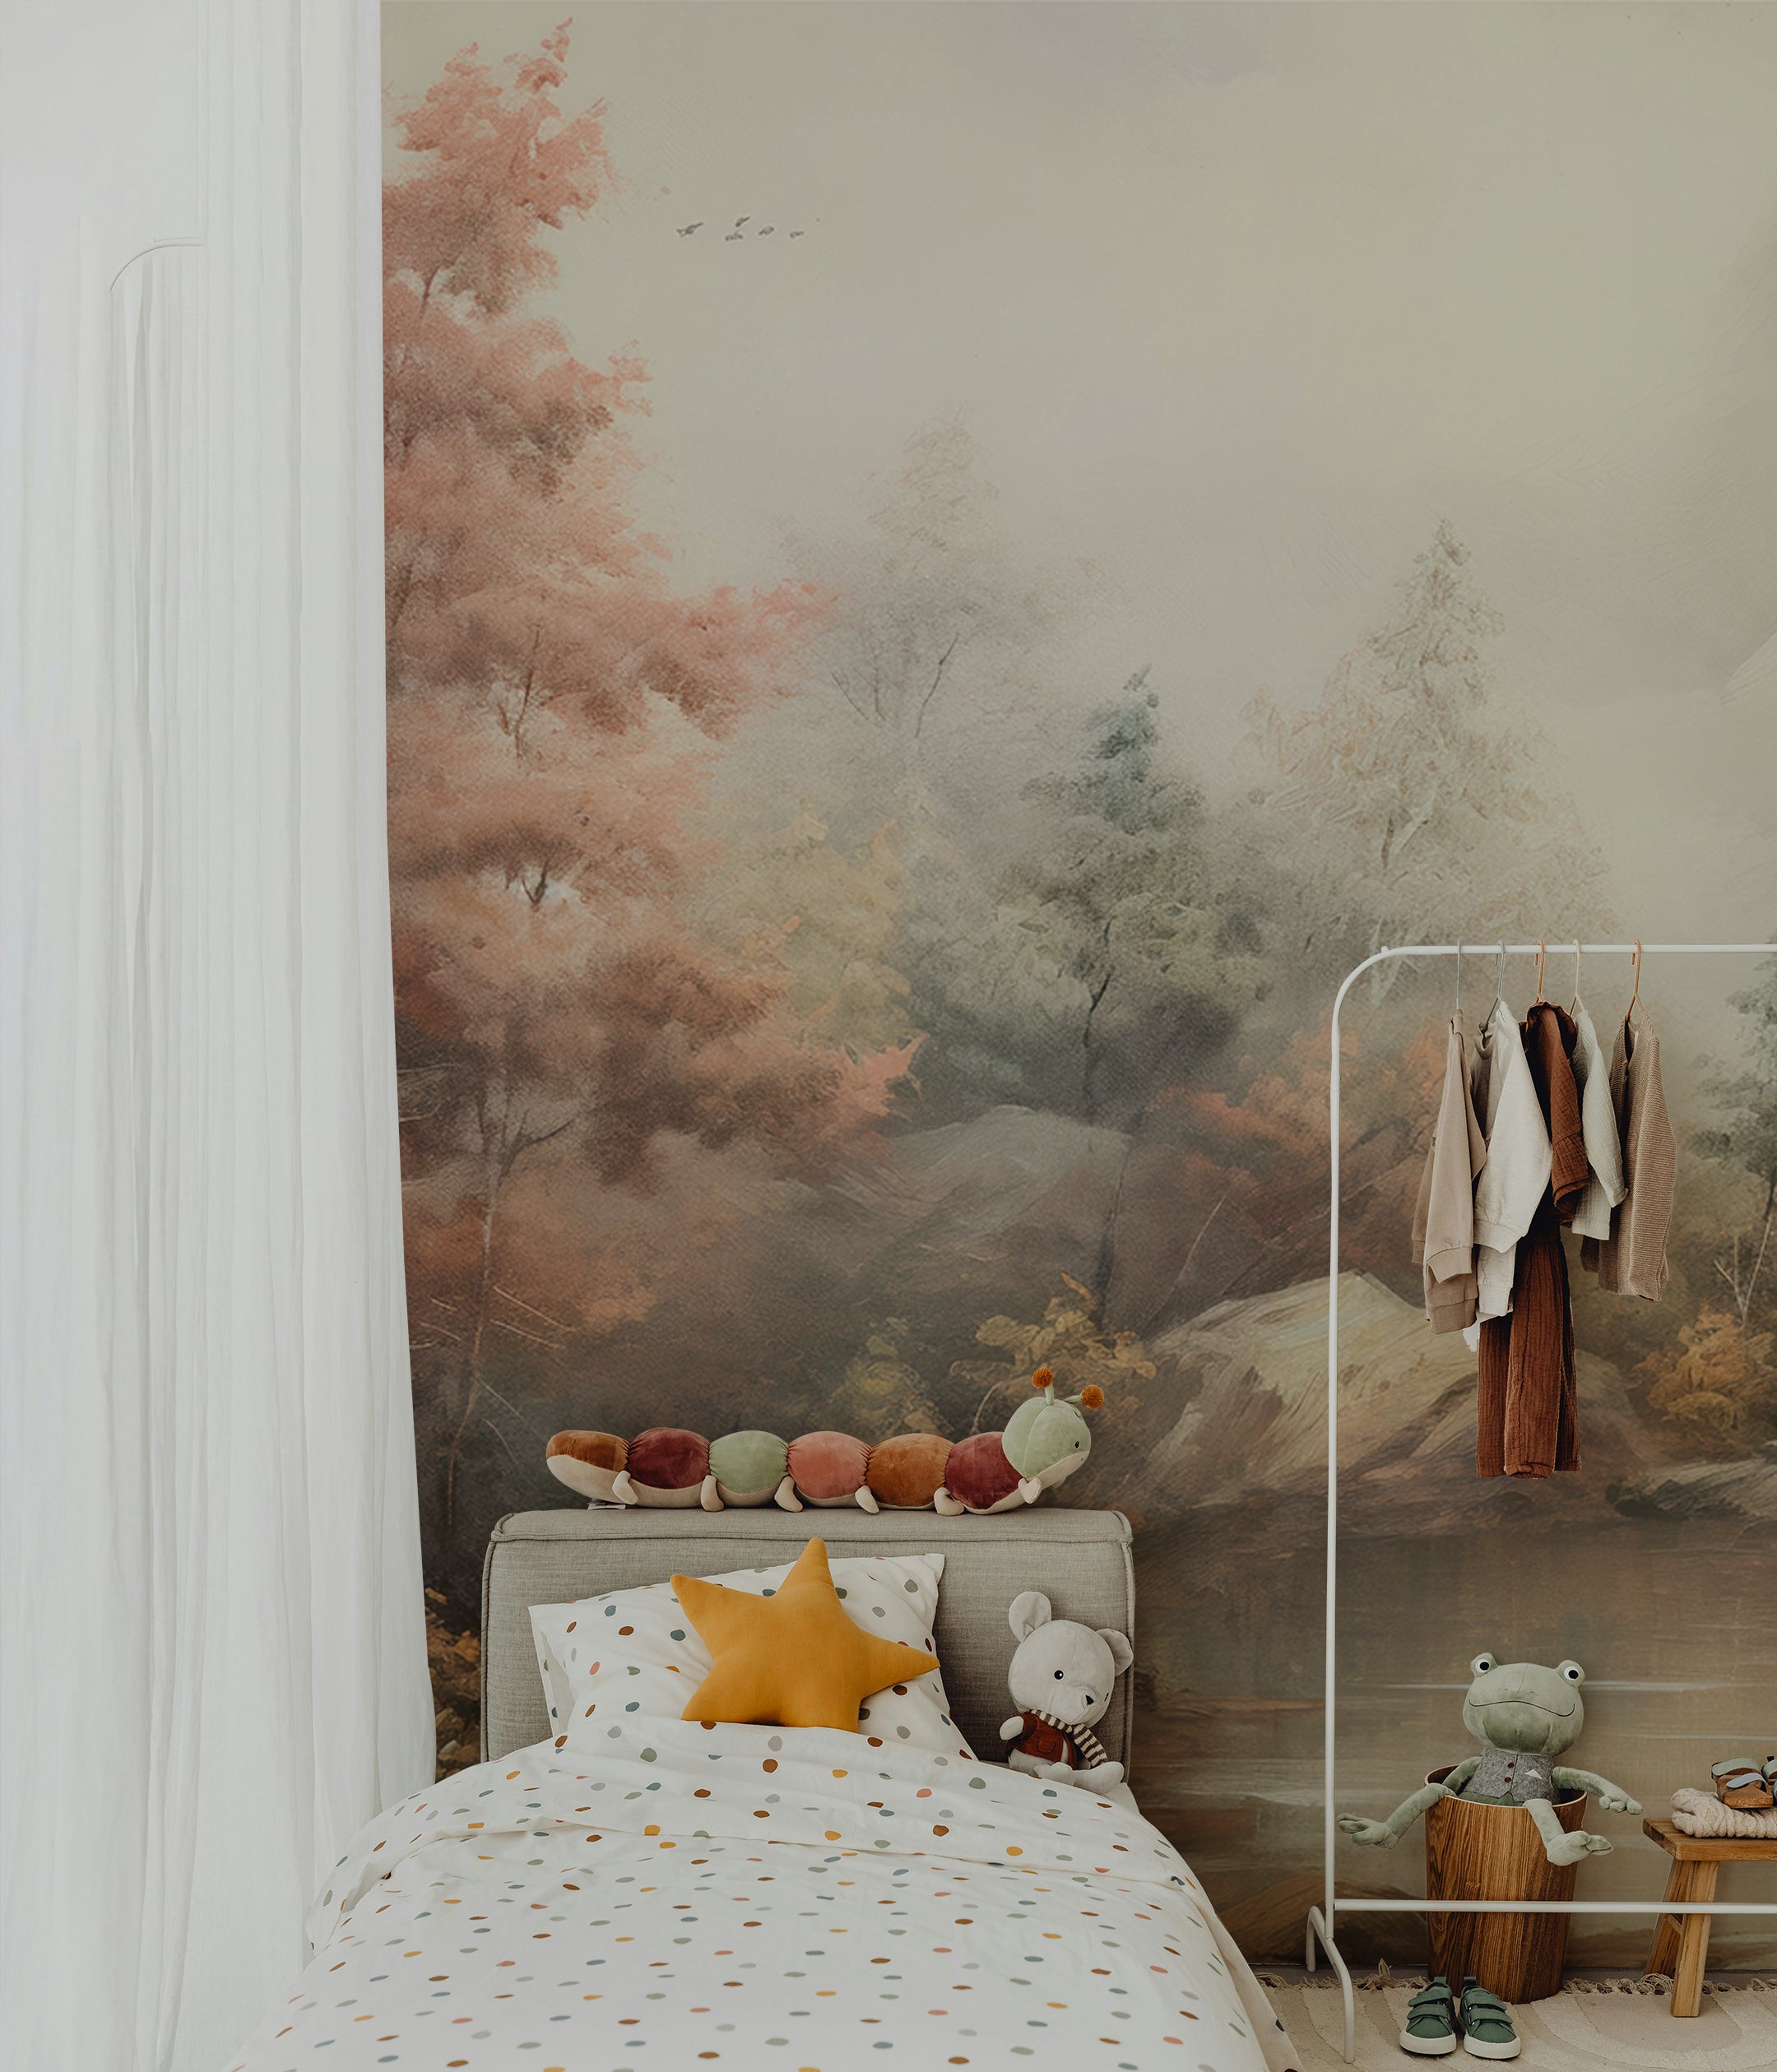 Cozy kids' room featuring the Fall Lake Mural as a backdrop. The mural depicts a peaceful lake and autumnal forest scene, with a bed, plush toys, and clothing rack complementing the serene, natural ambiance.